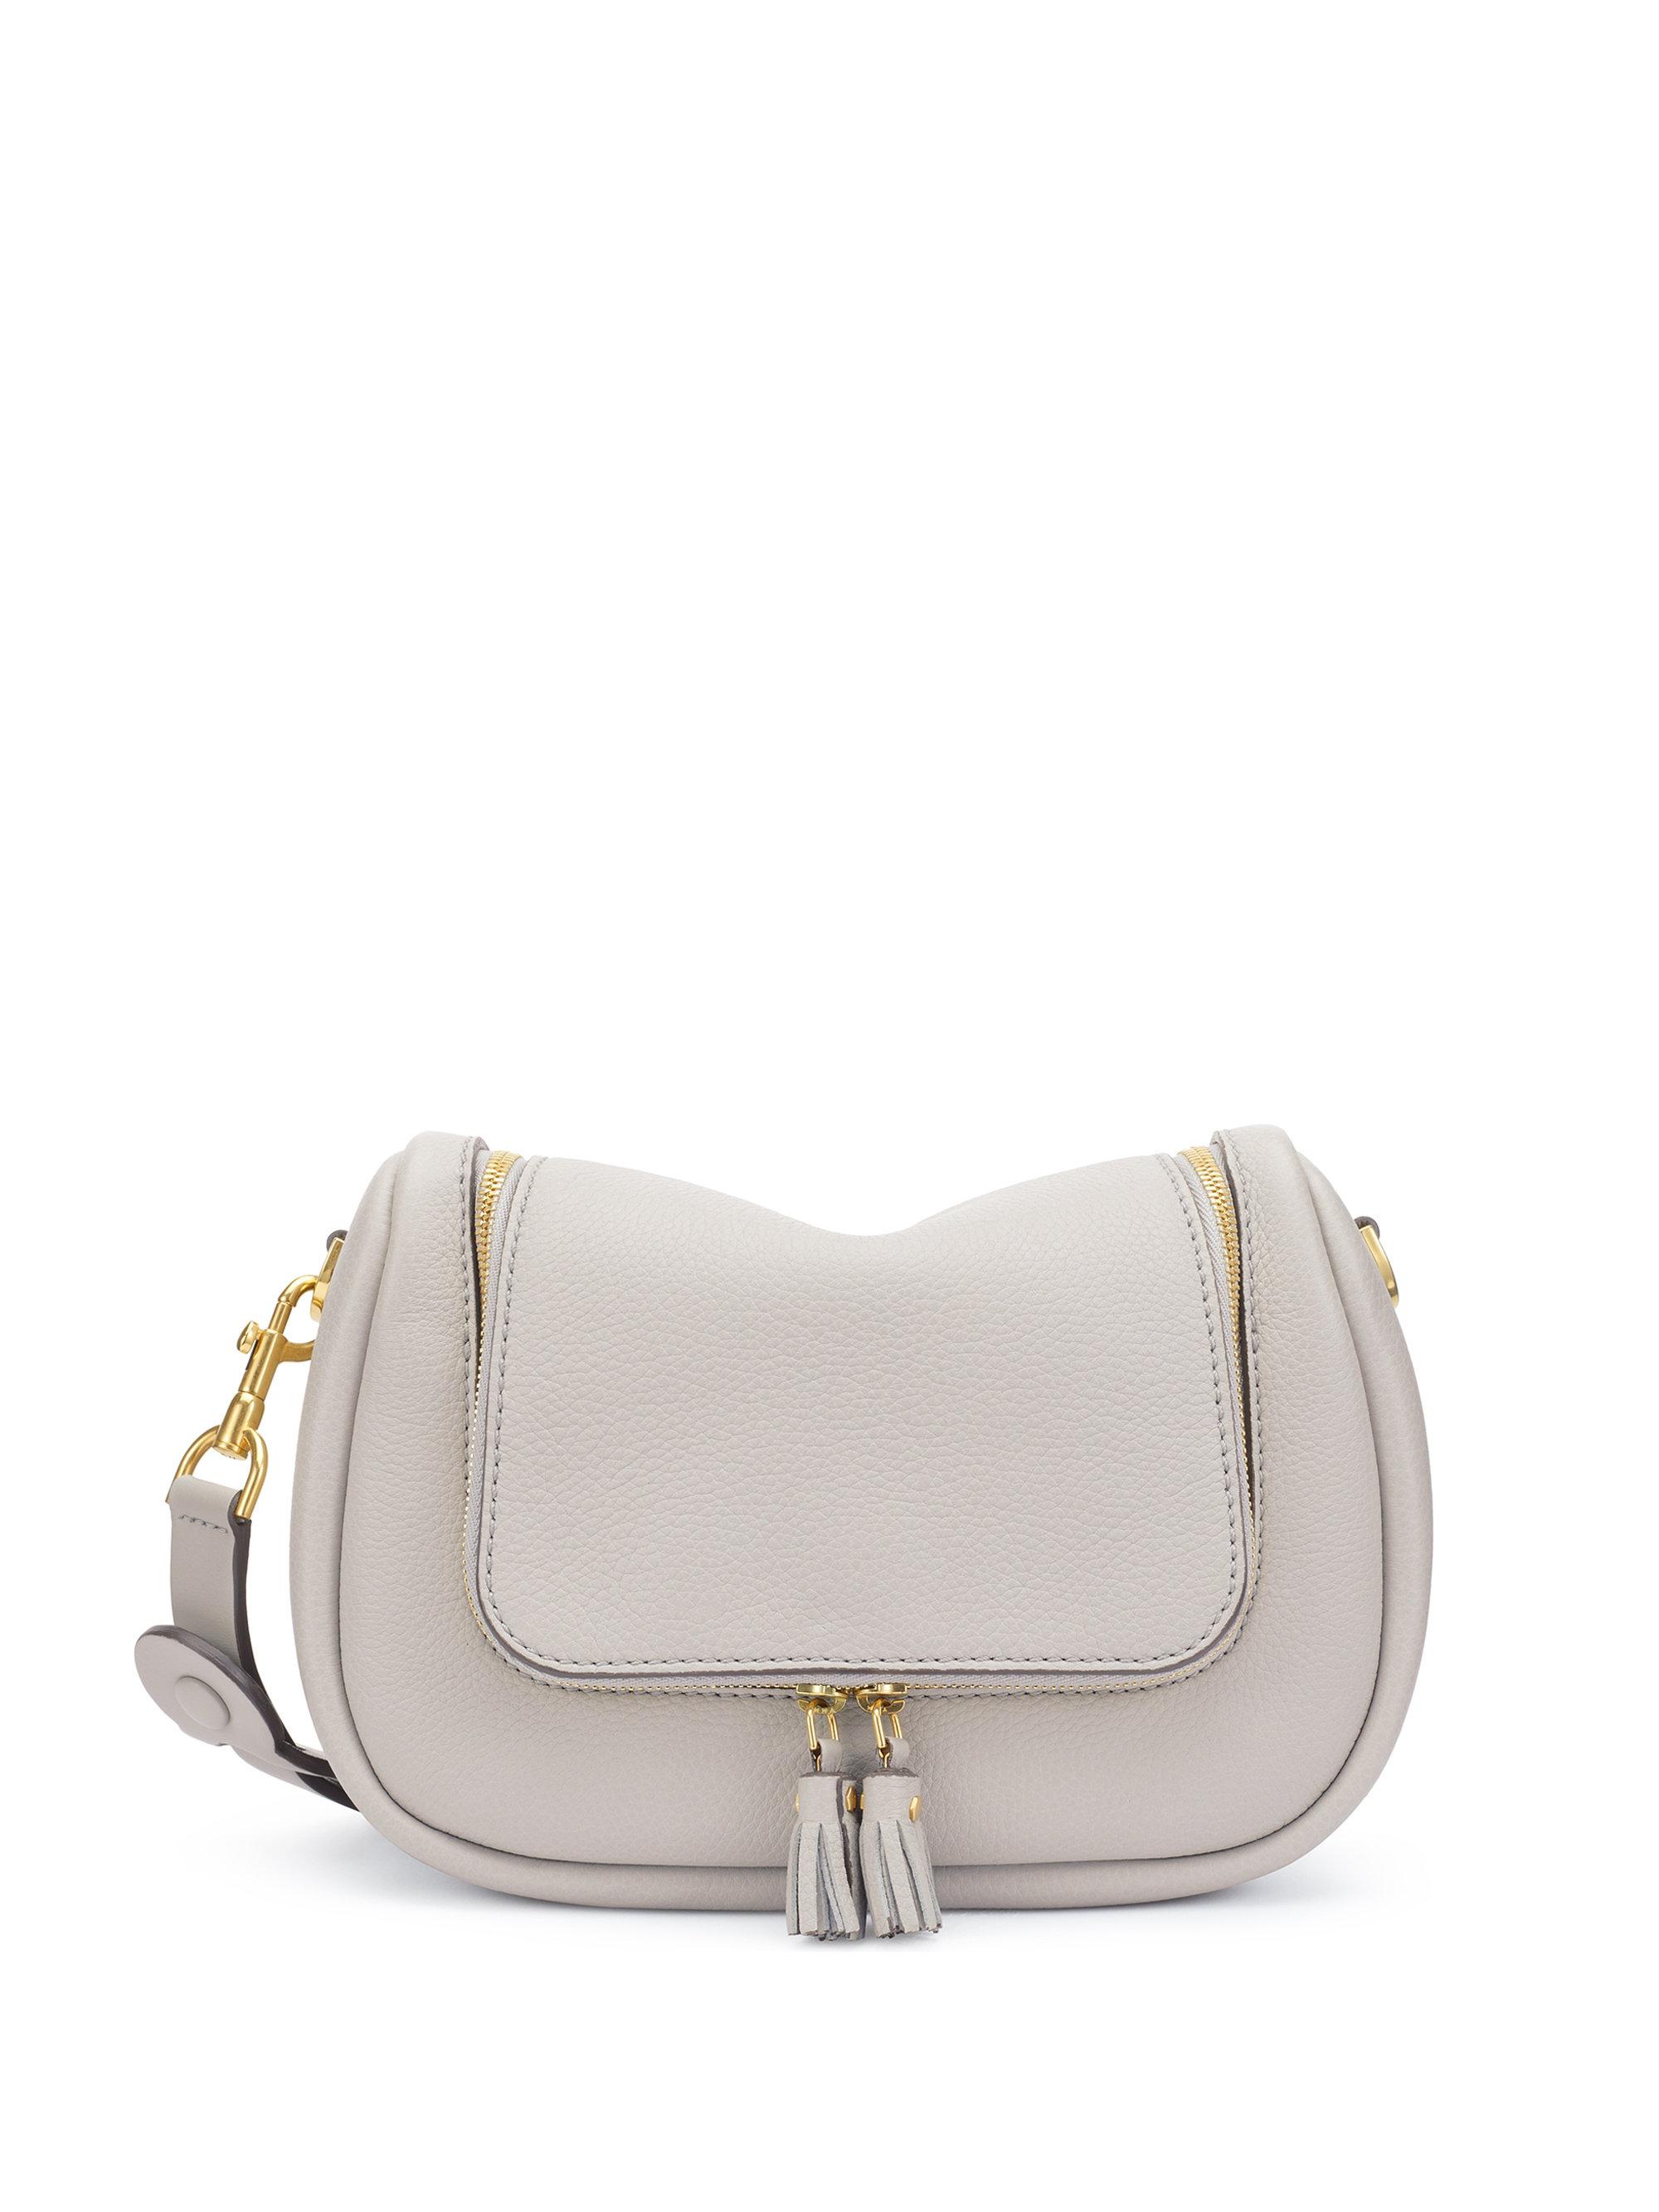 Anya Hindmarch Leather Vere Small Soft Satchel in Gray - Lyst